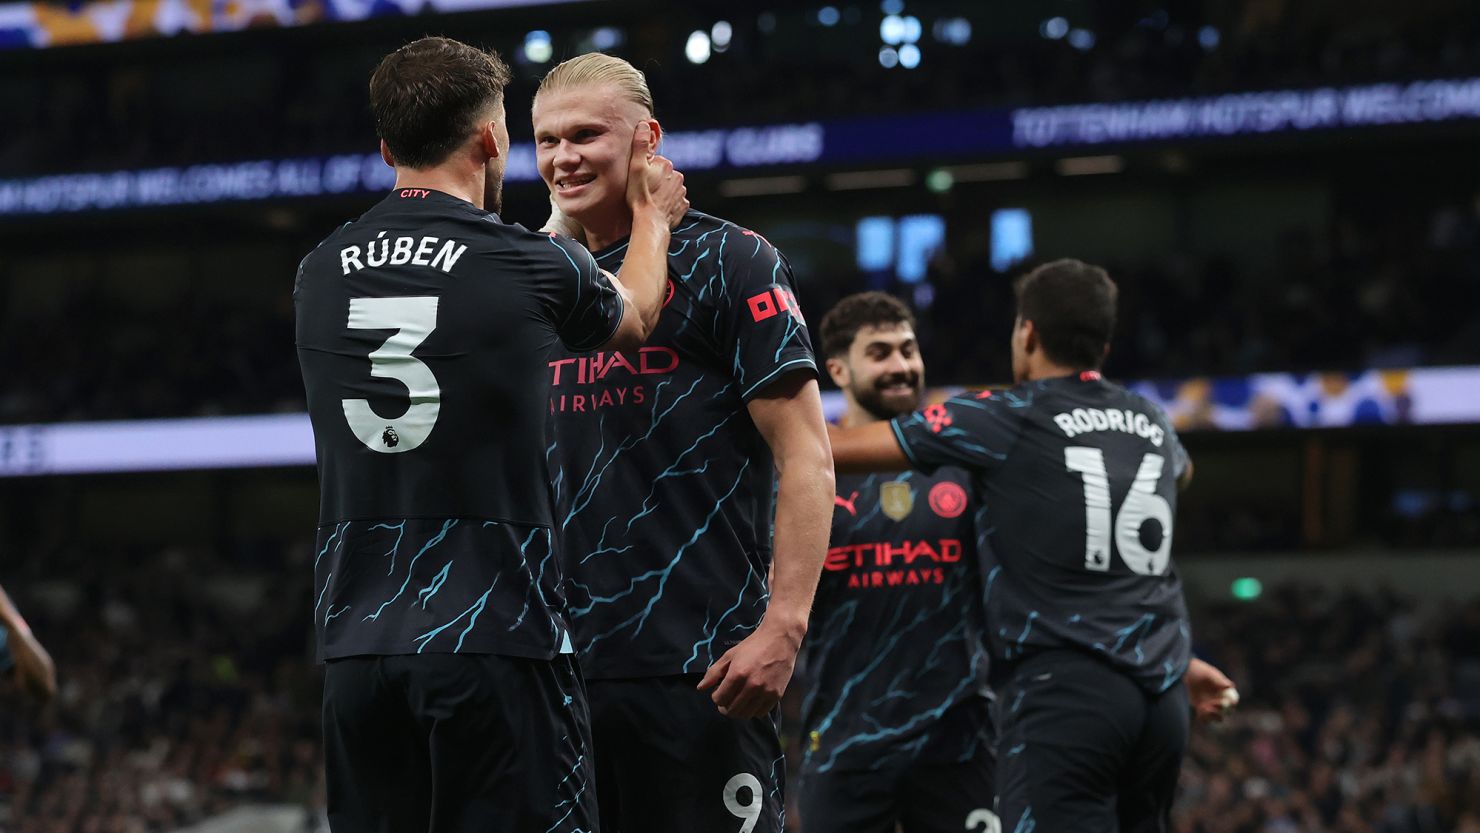 Erling Haaland scored two goals as Manchester City beat Tottenham in a vital game.